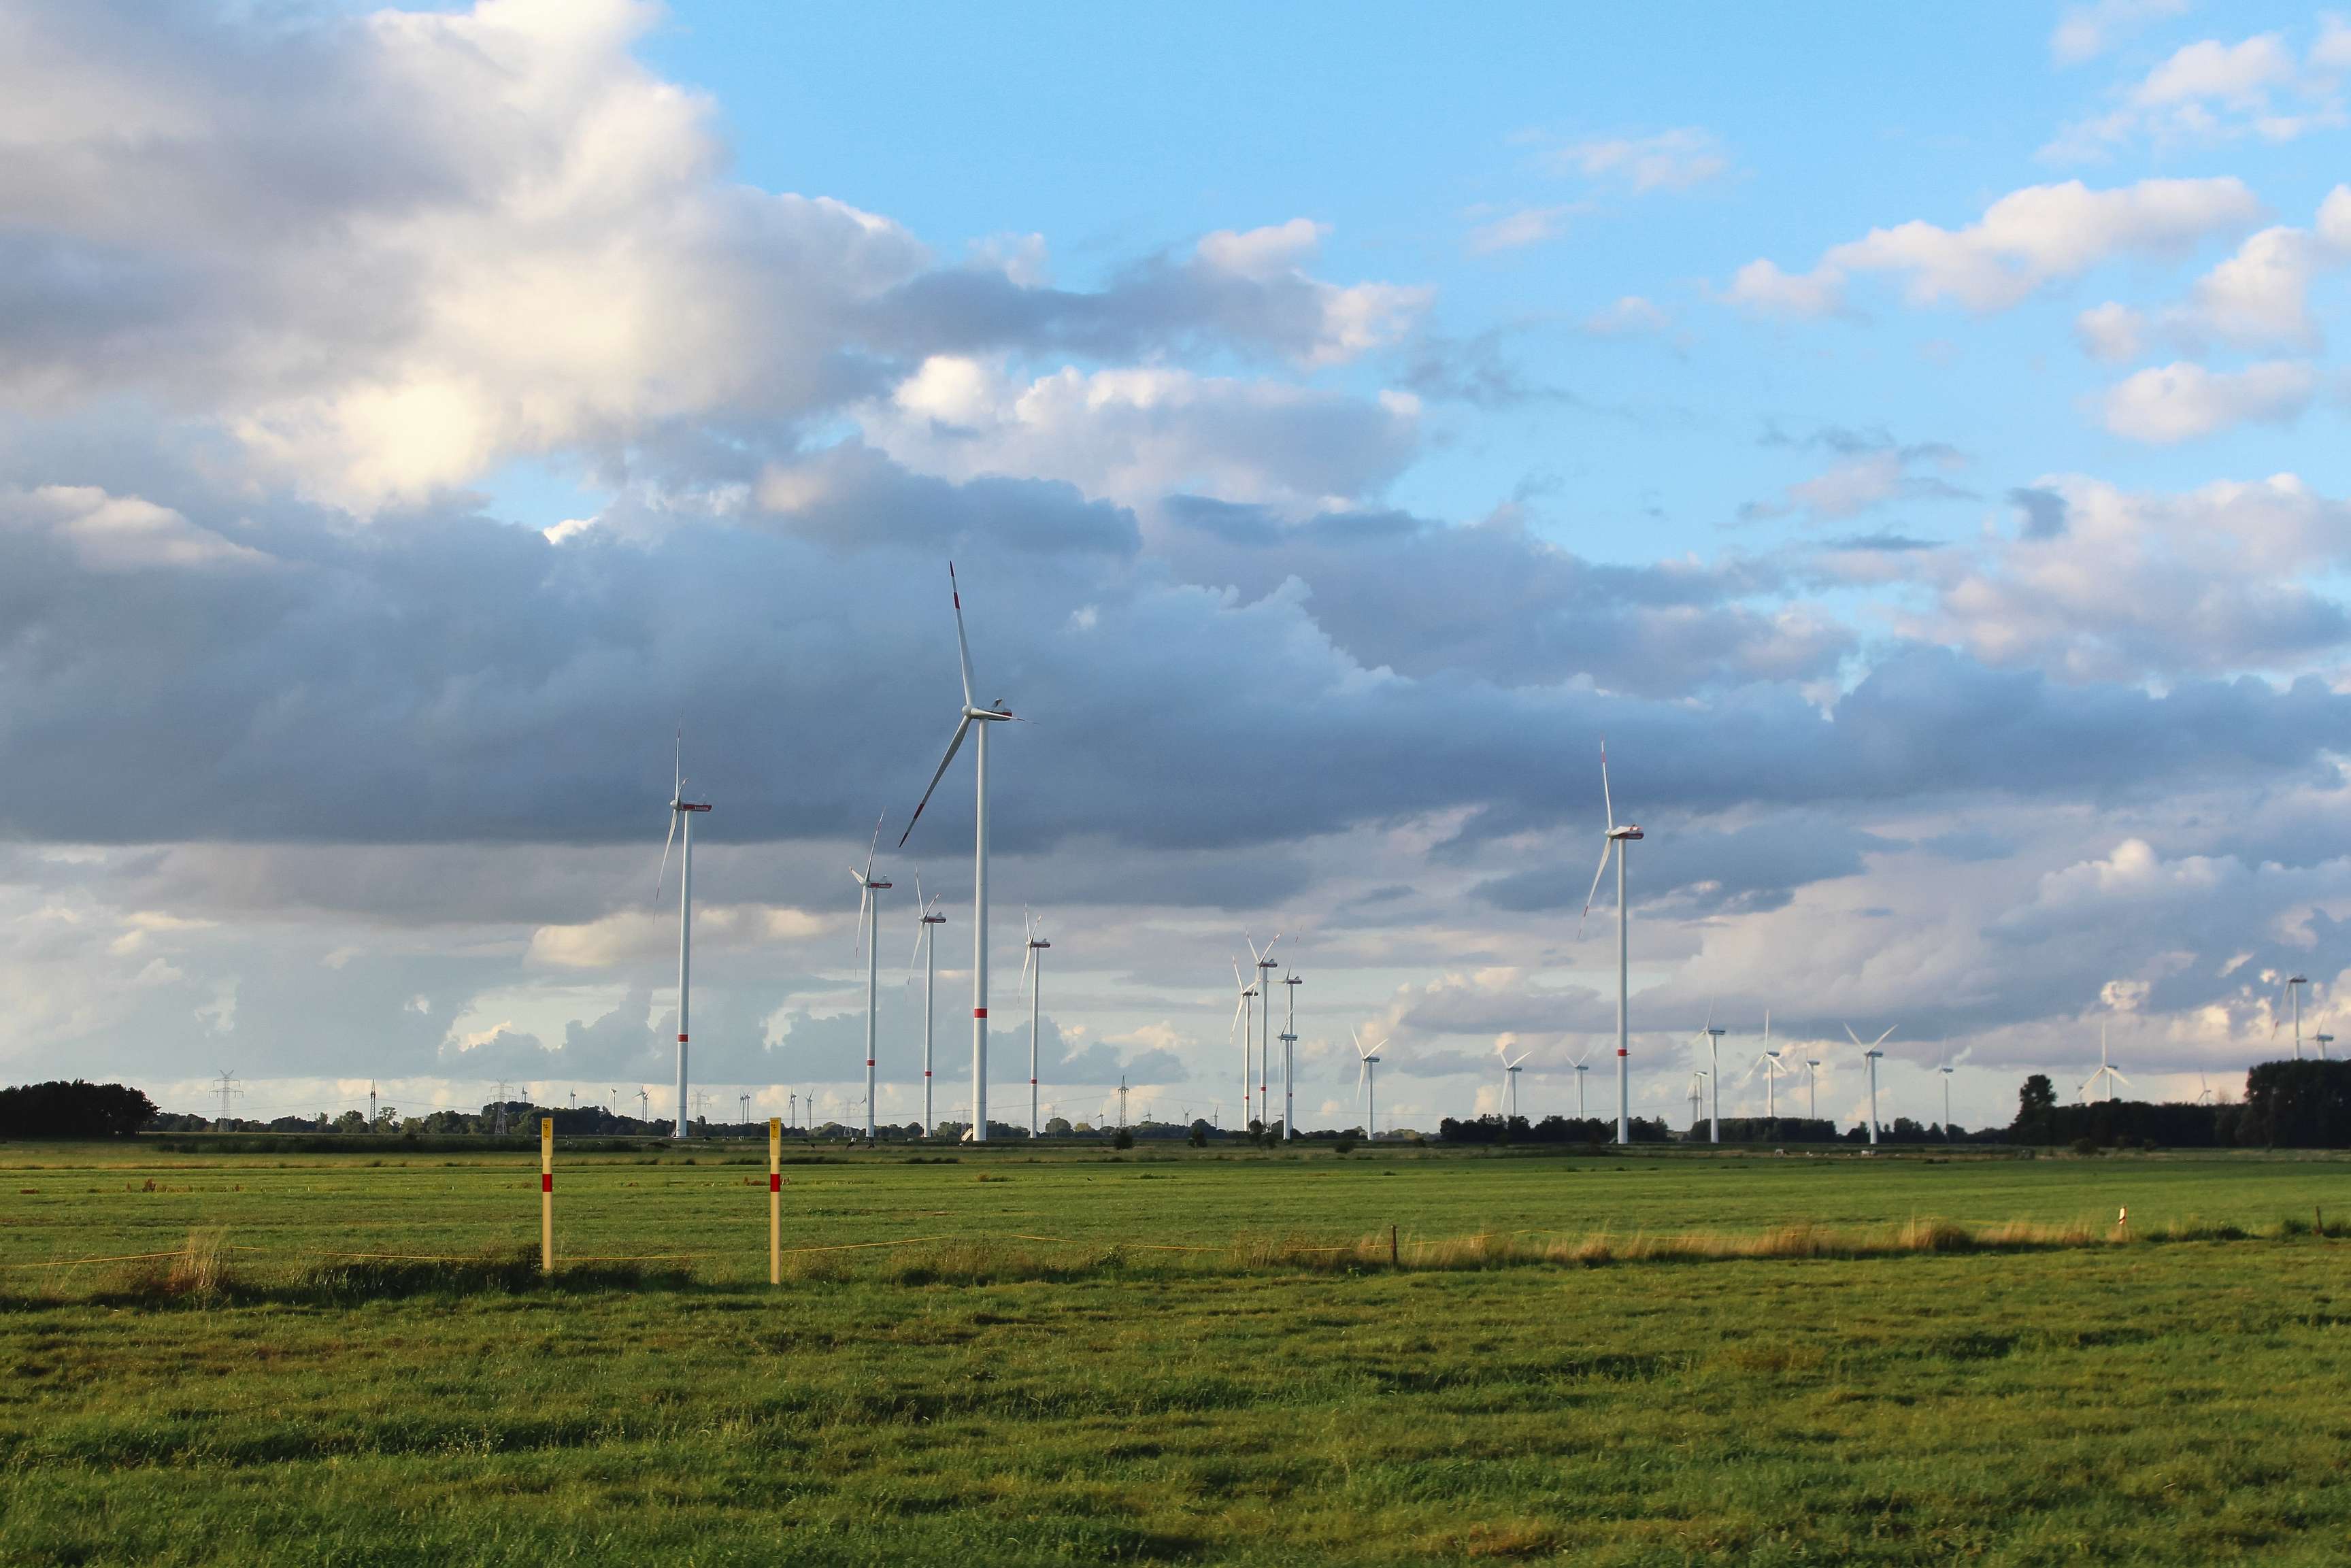 A landscape with wind turbines and pipeline markings in the foreground.